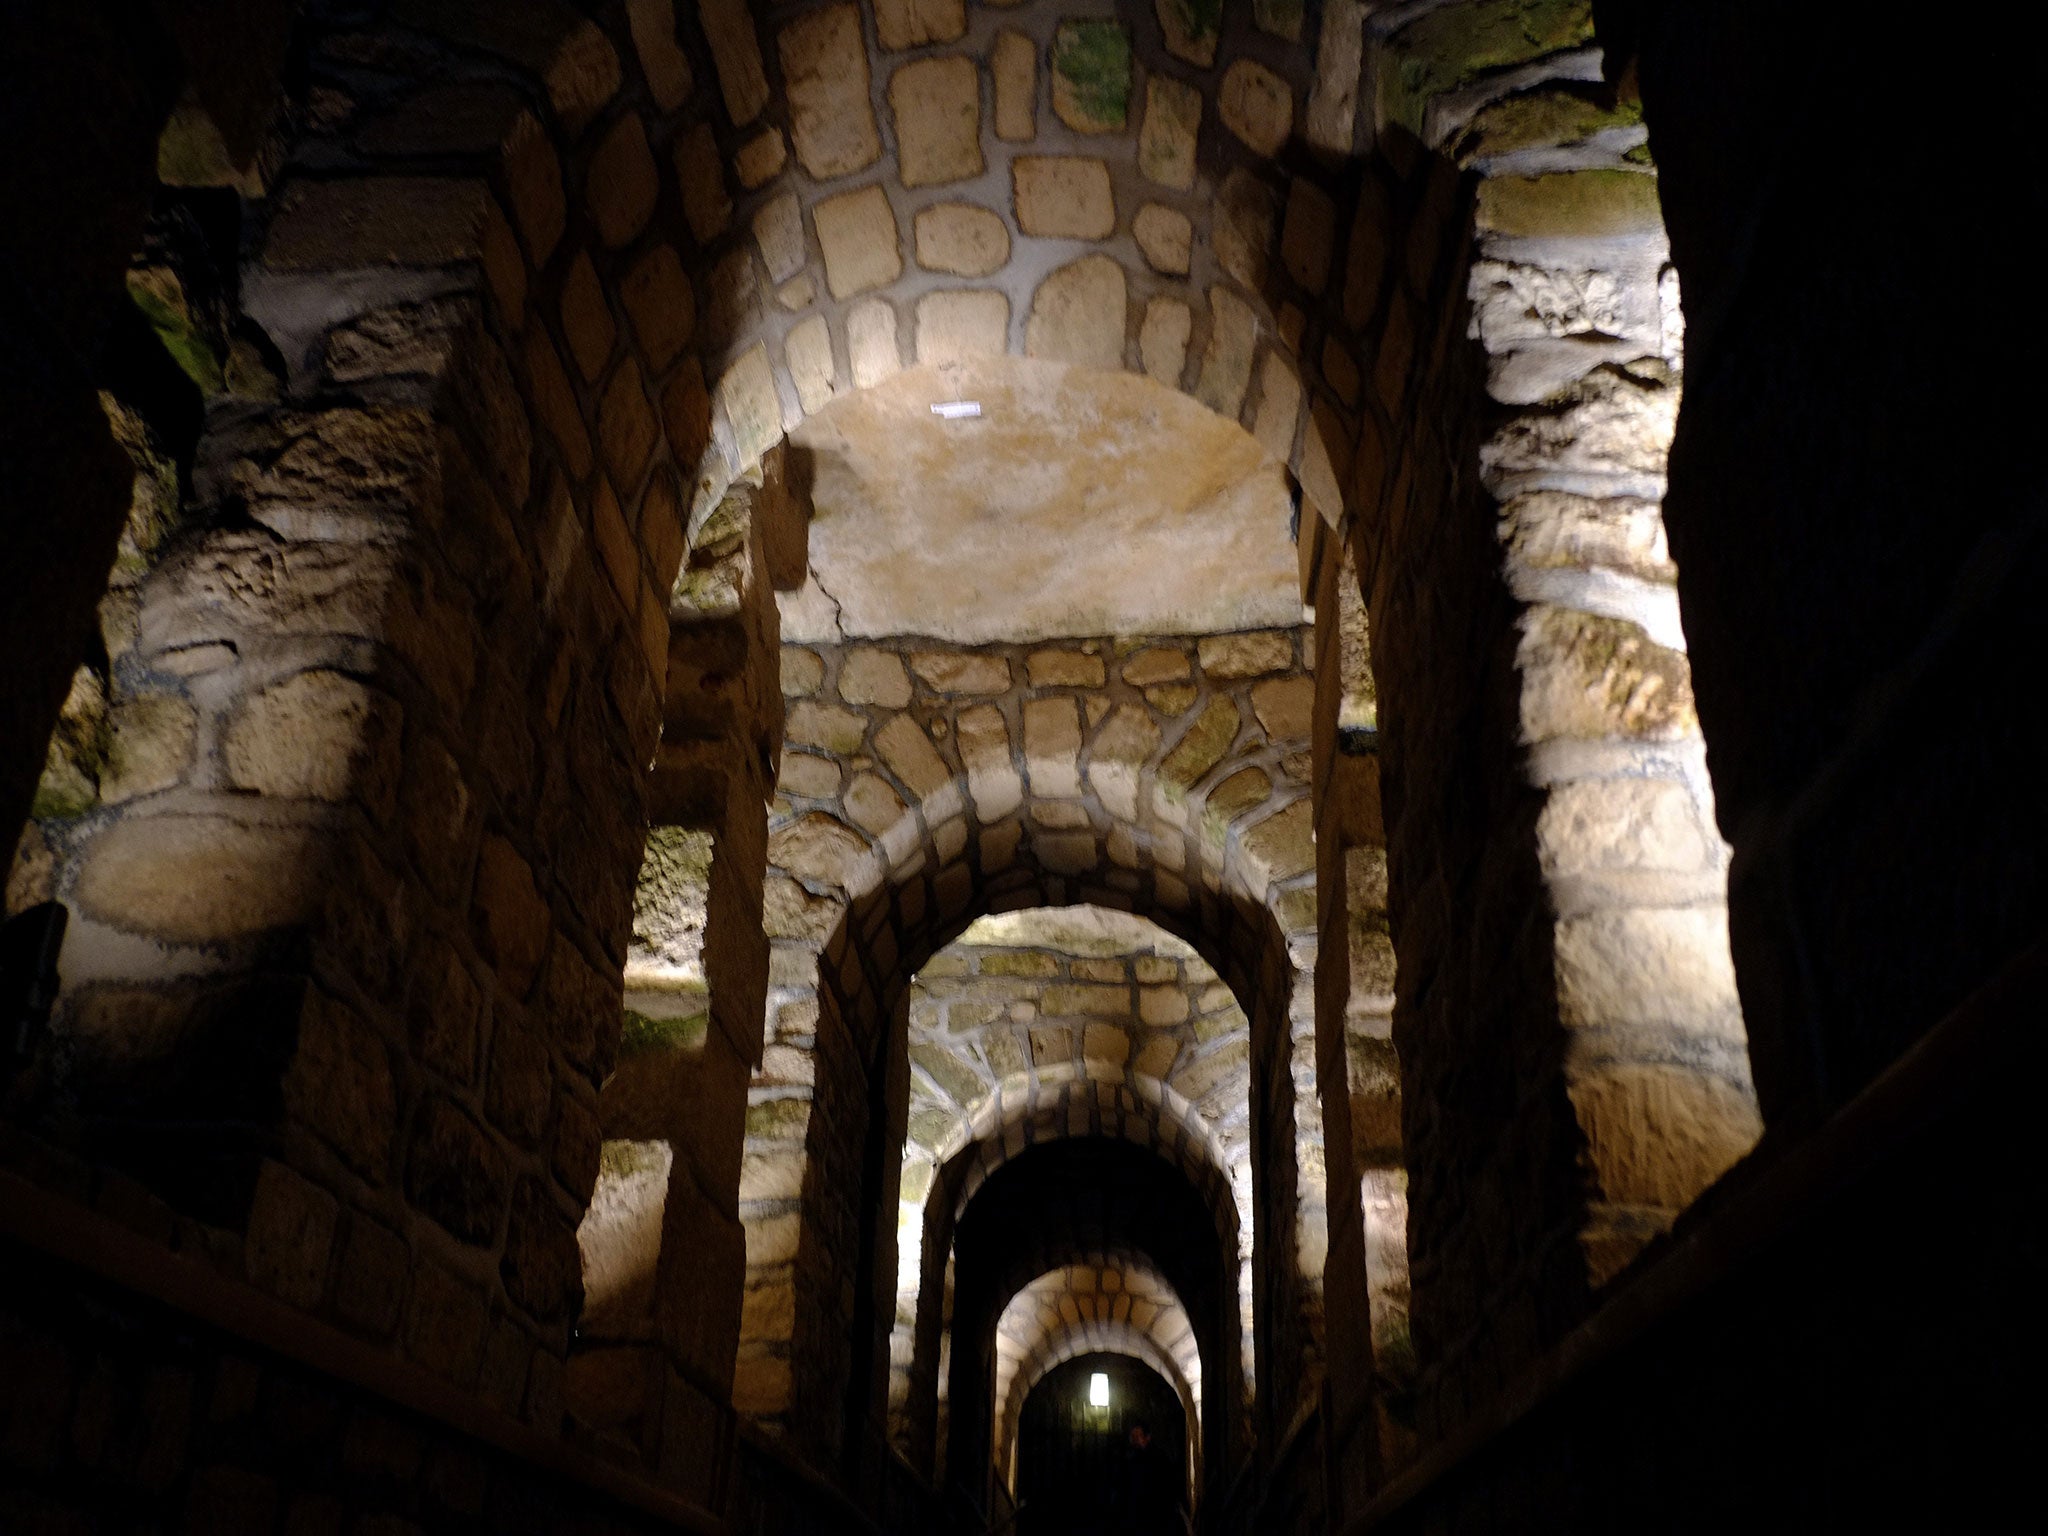 The catacombs are housed in historical limestone quarries beneath the streets of Paris